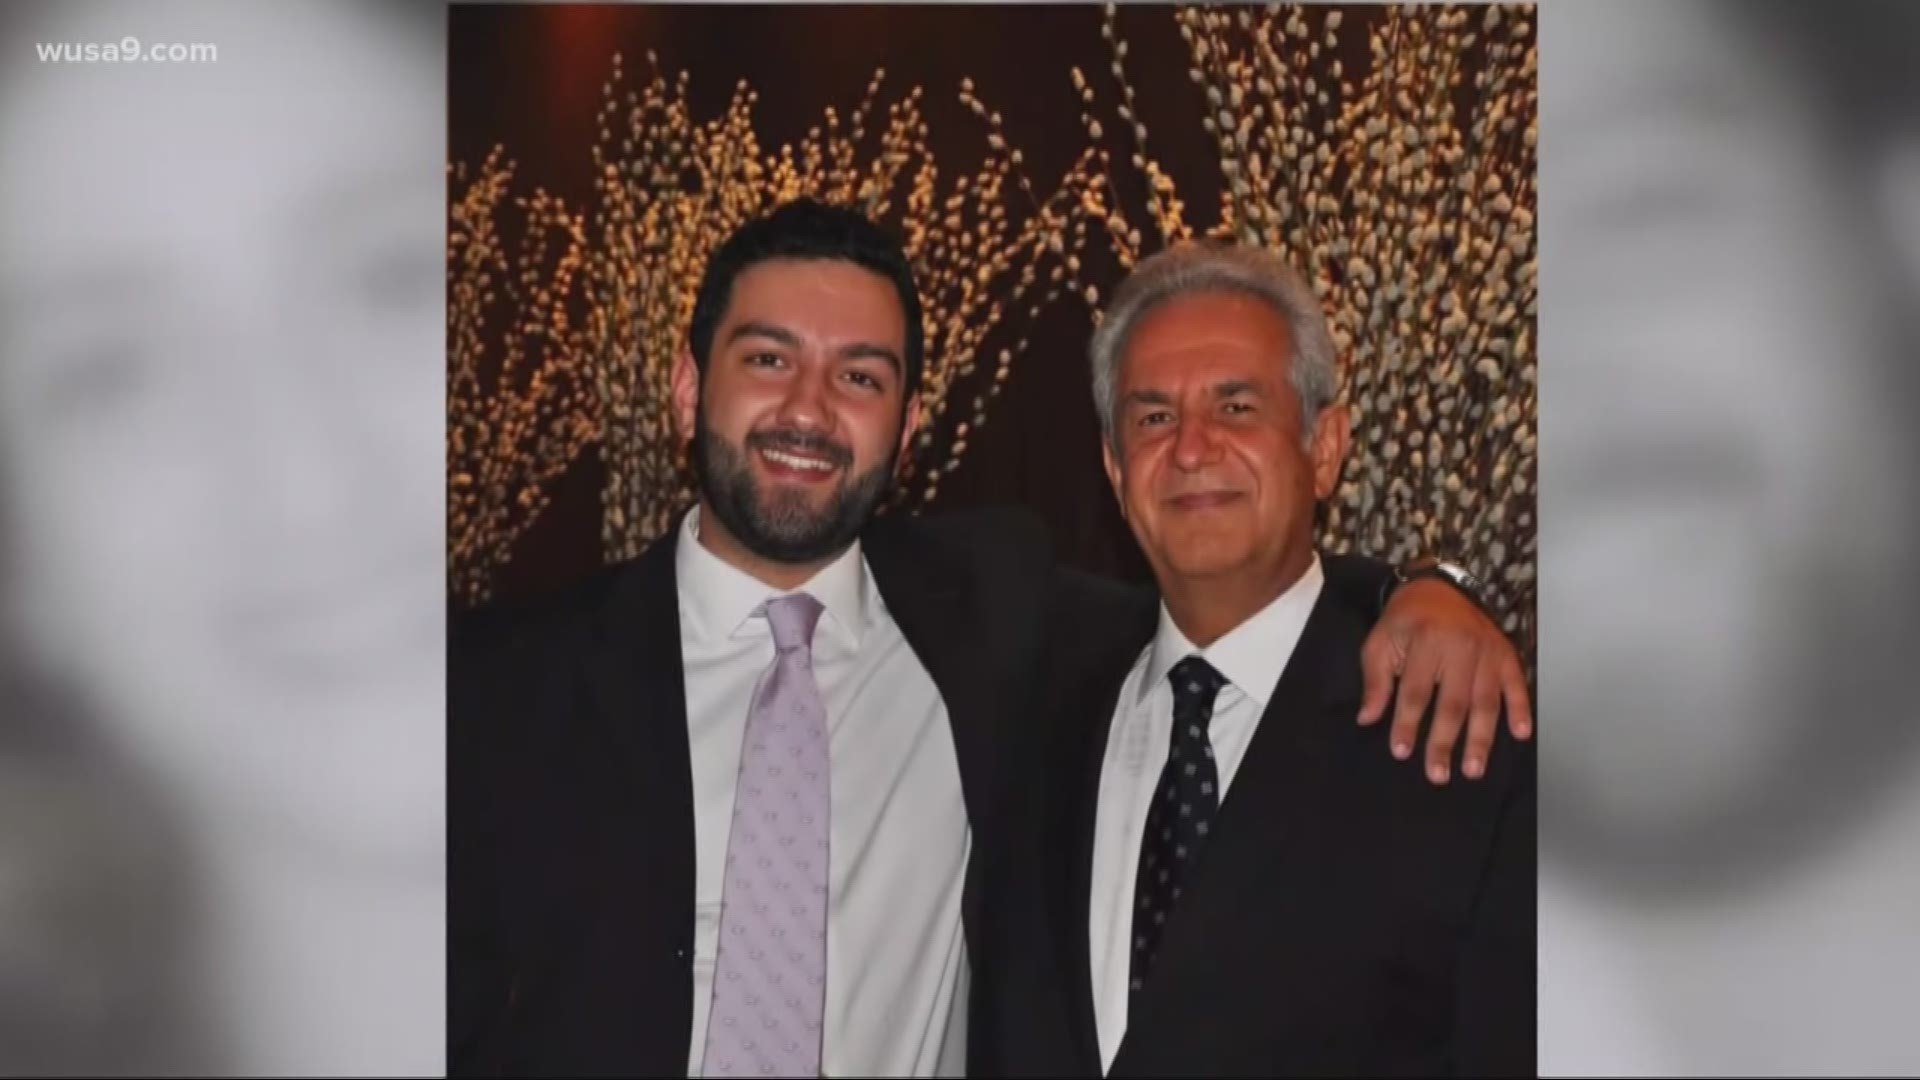 A call for transparency -- from lawmakers. Virginia Senator Mark Warner and Iowa Senator Chuck Grassley want some kind of update on the investigation into the death of Bijan Ghaisar. He's the man shot to death by Park Police -- two years ago.